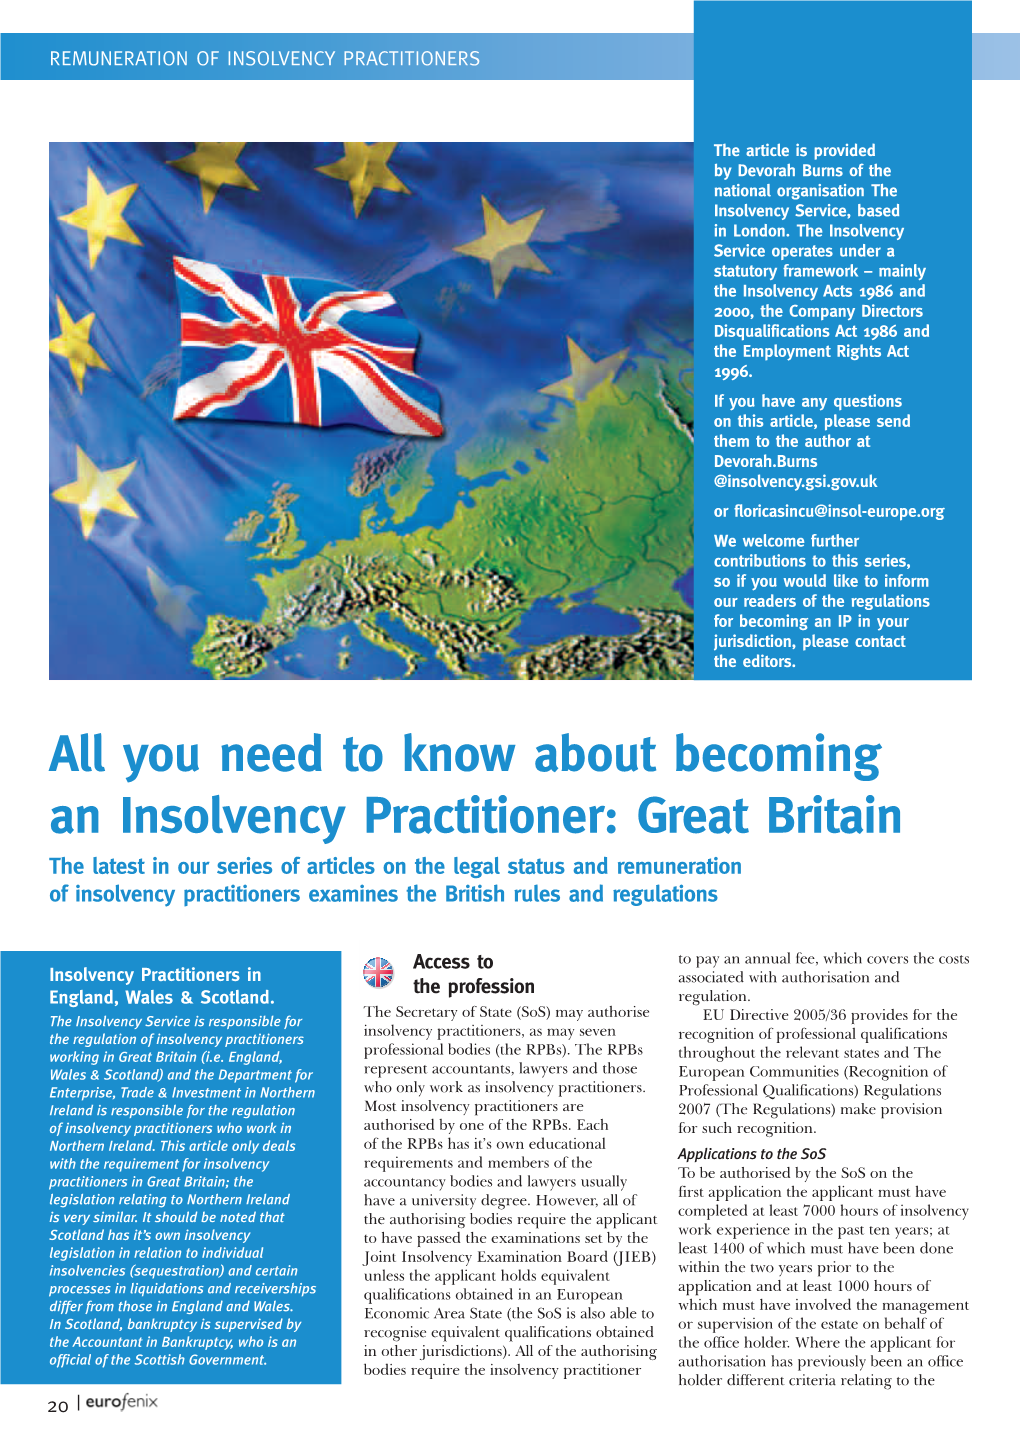 How to Become an Insolvency Practitioner In